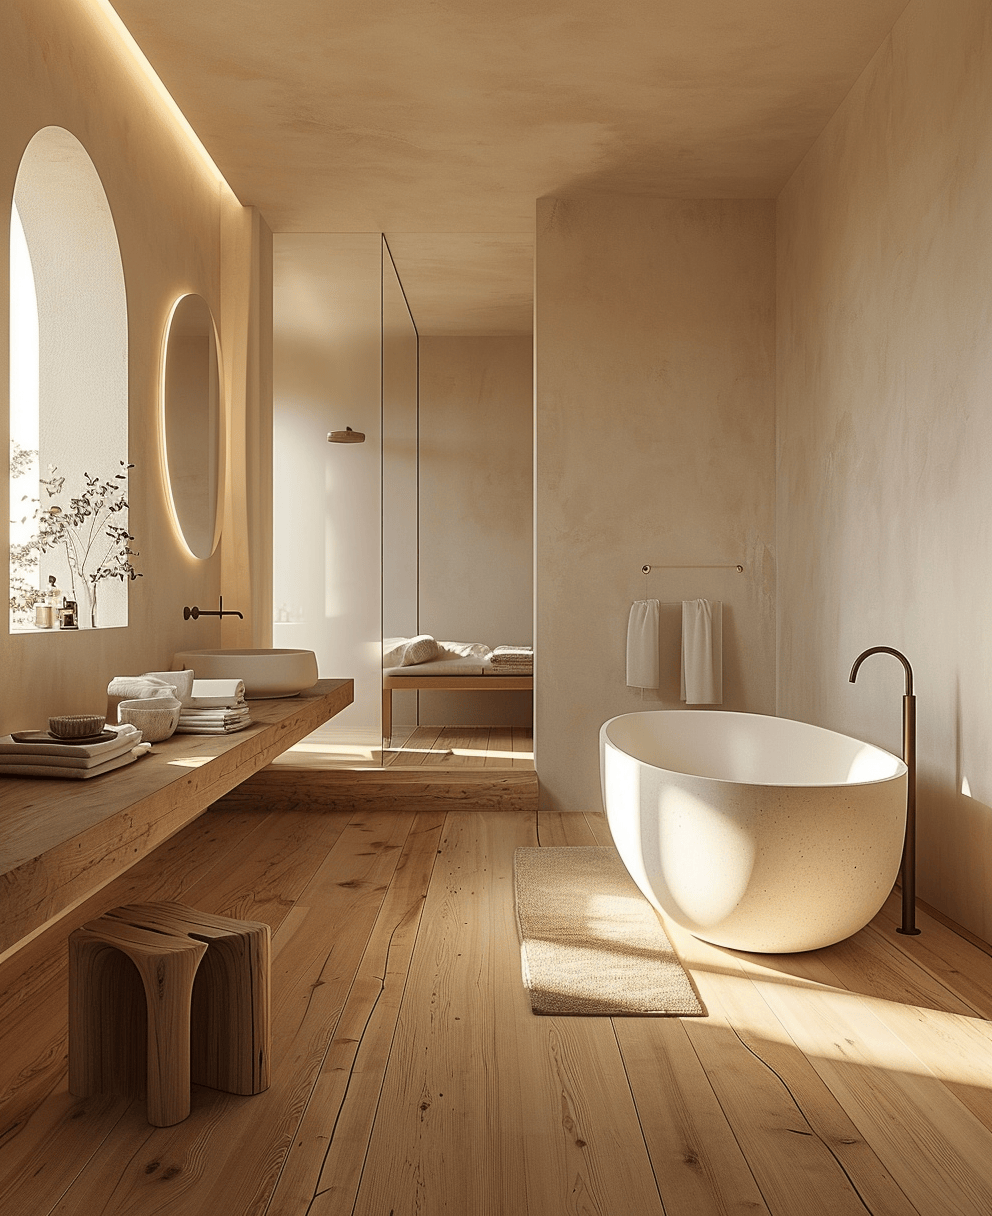 Cozy Japandi interiors of a bathroom with warm wood tones and soft lighting